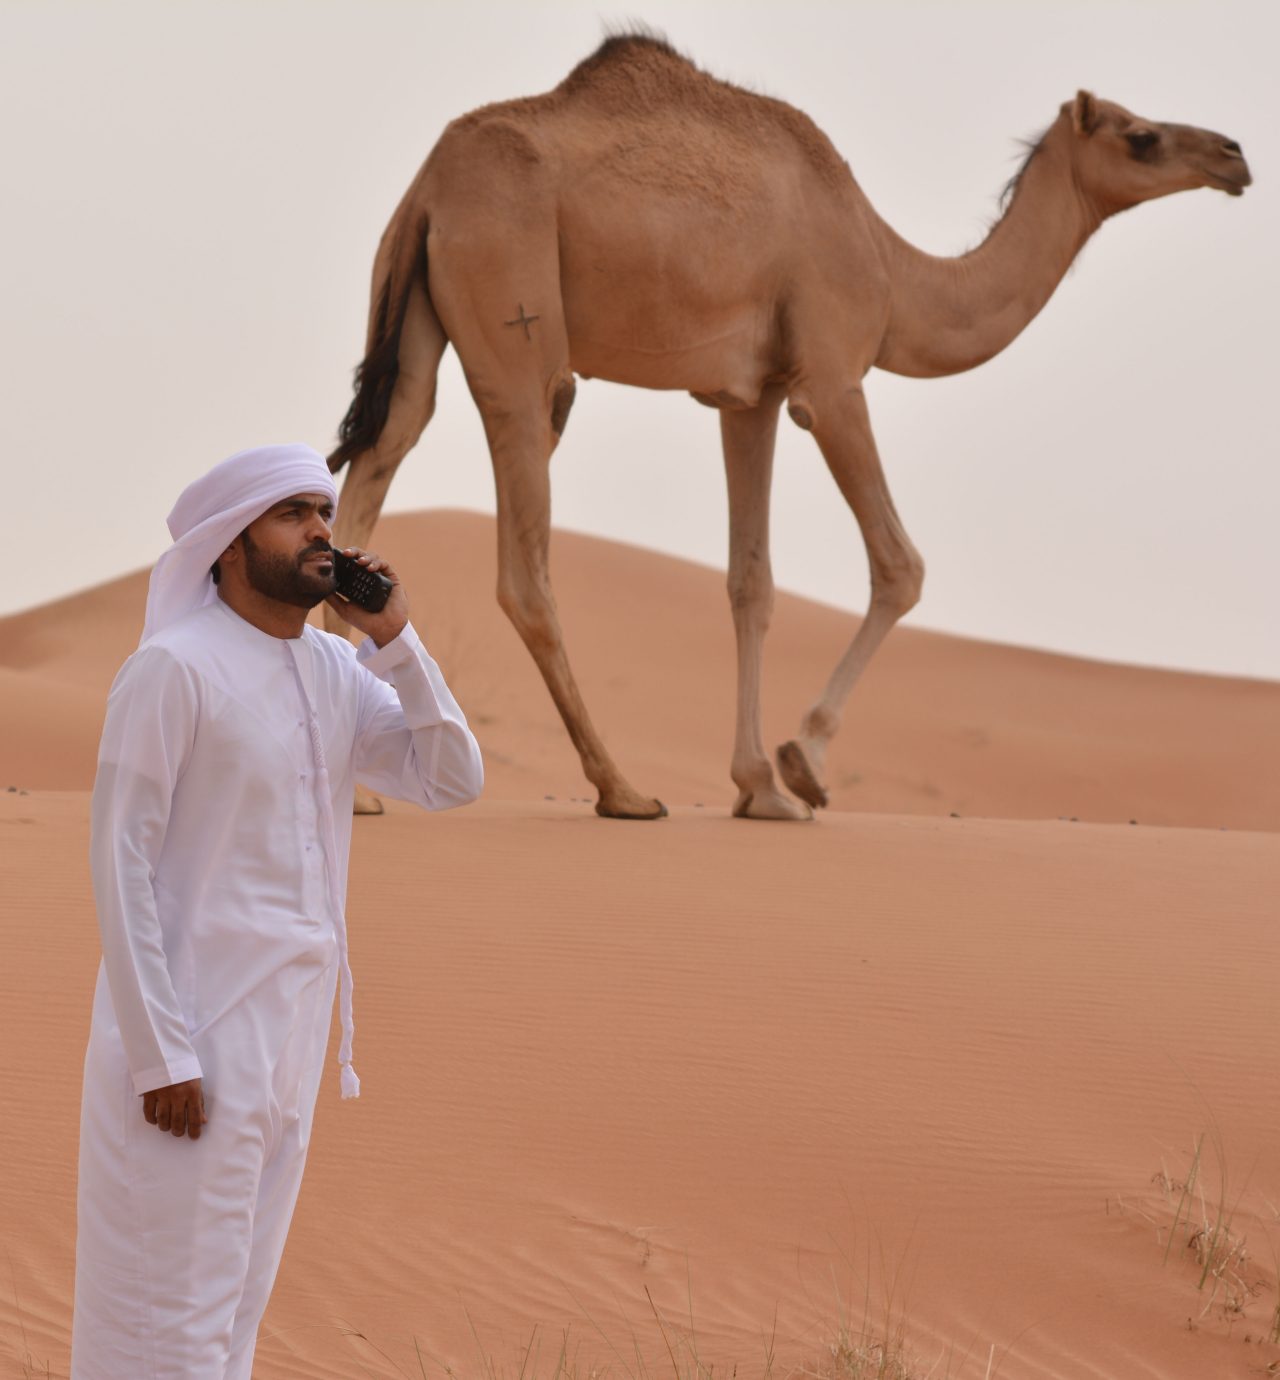 Saeed Al Memari using his IsatPhone 2 in the desert with a camel in the background